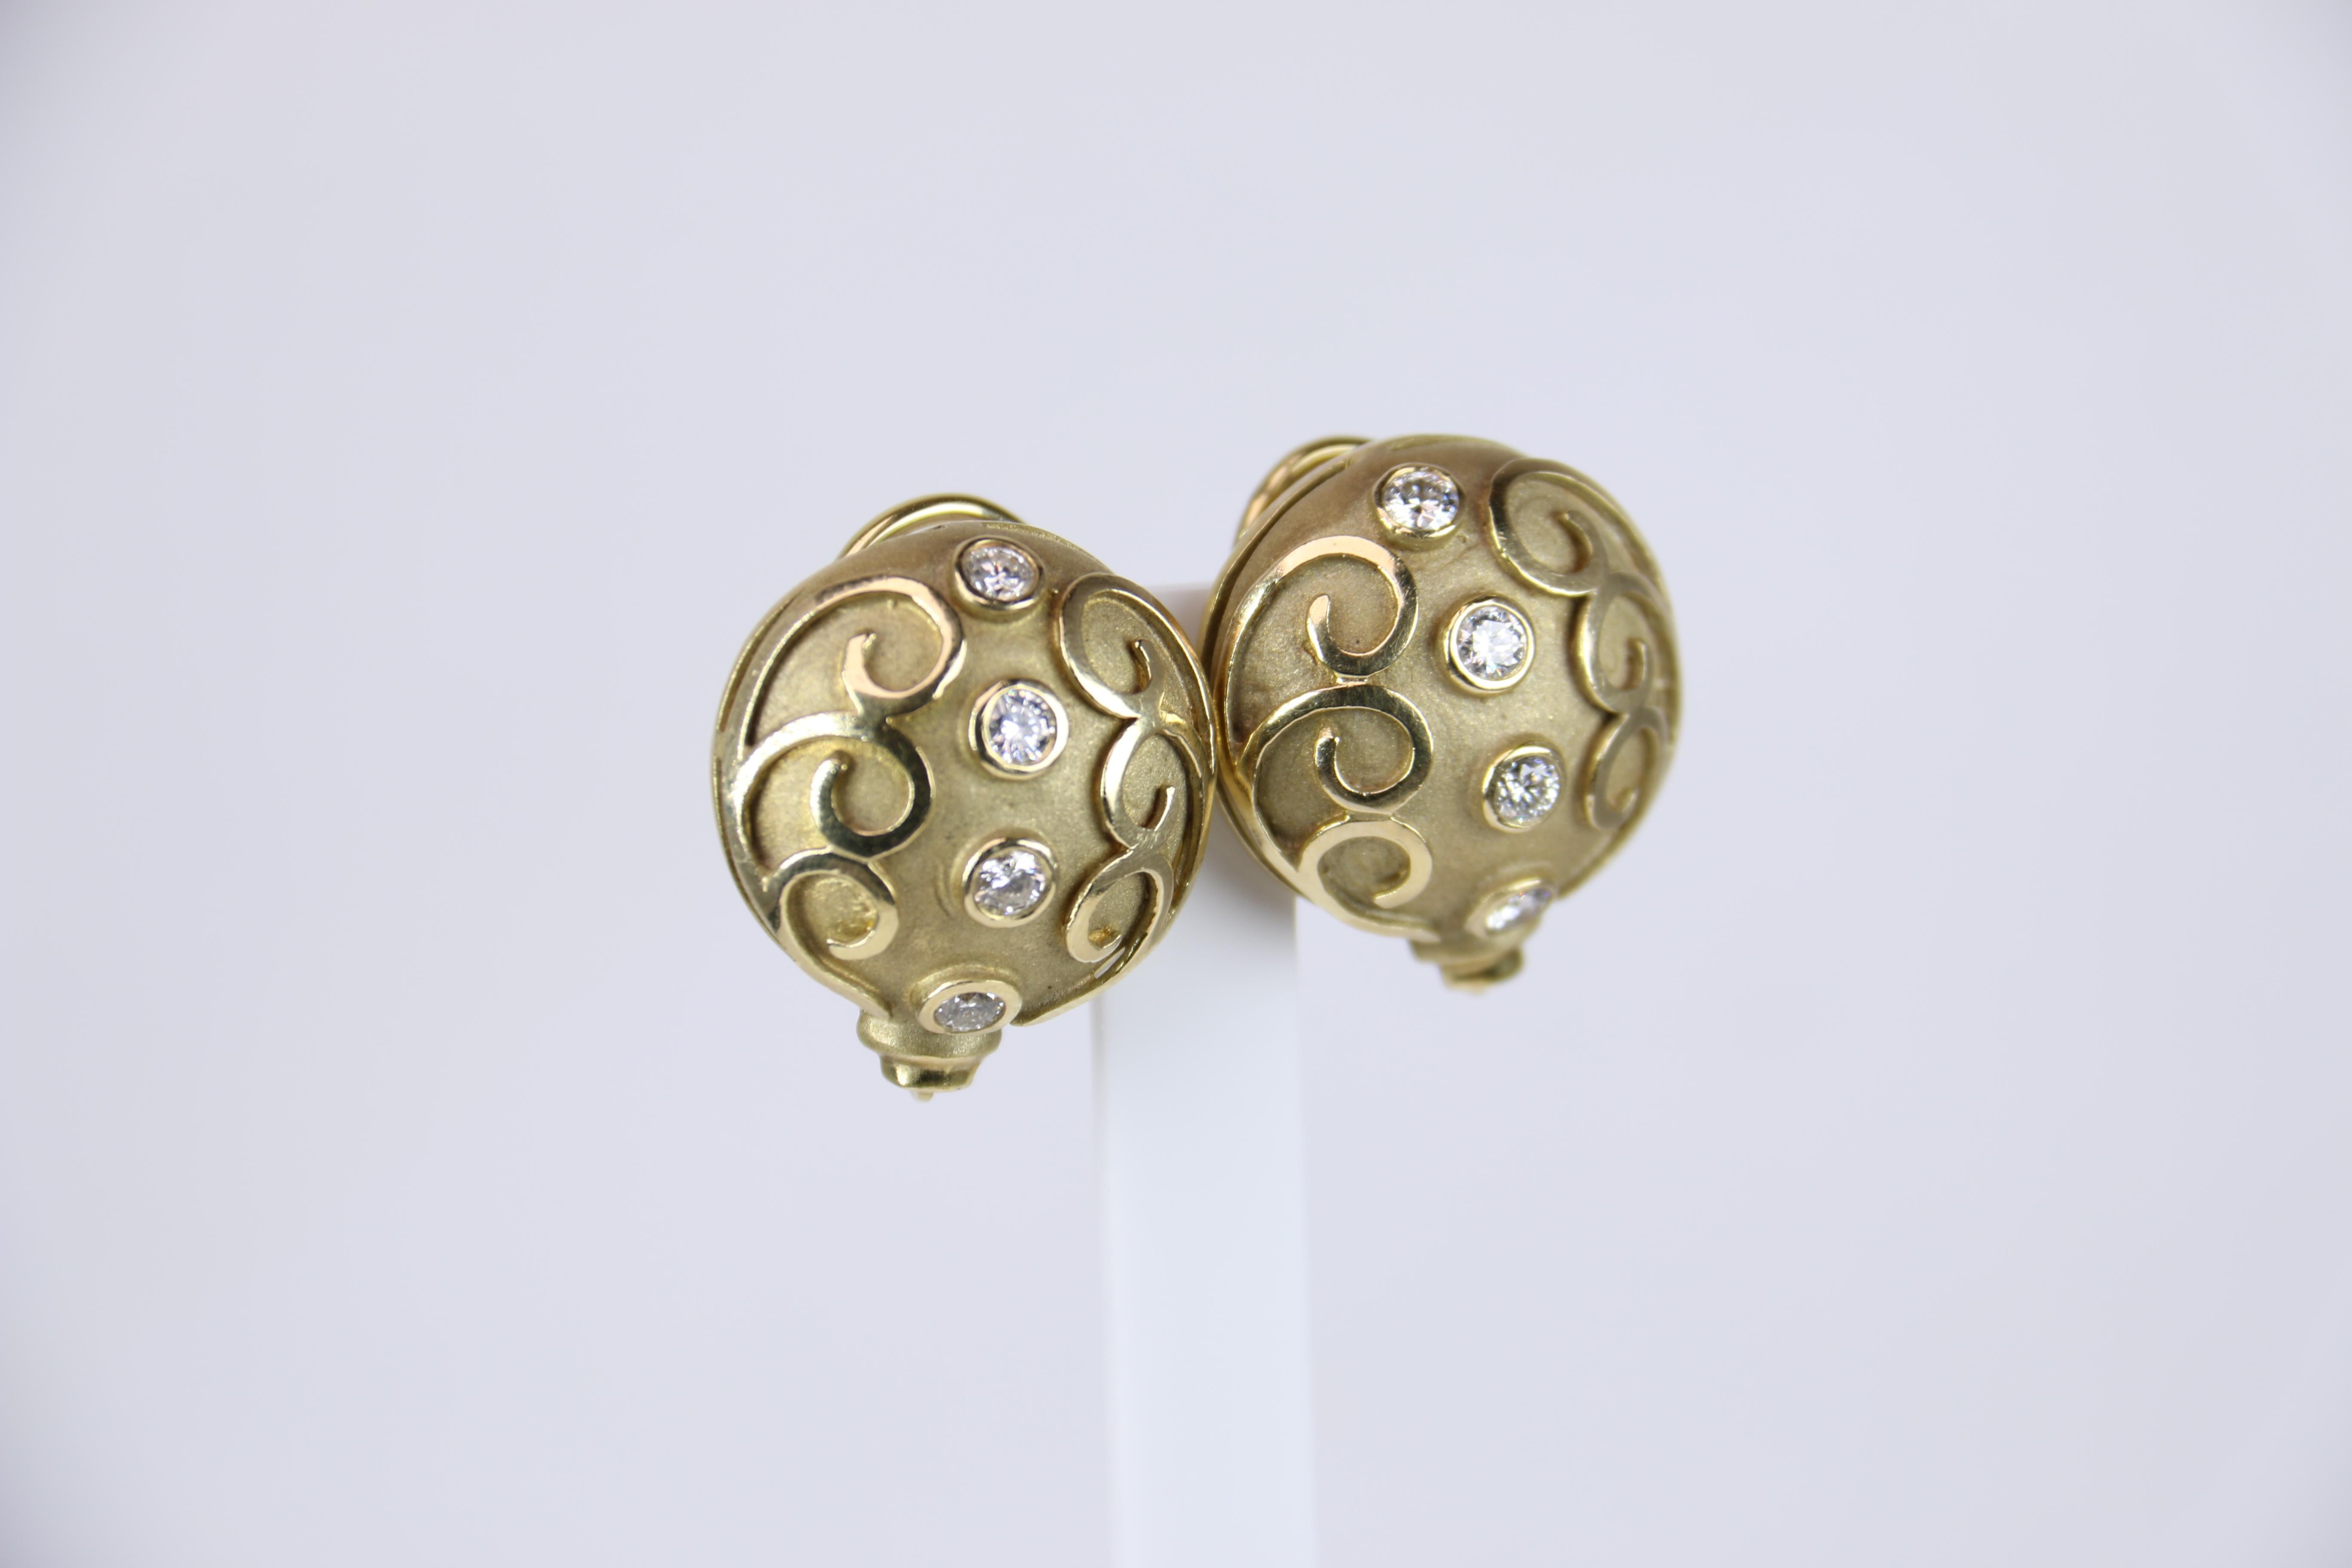 Round Earrings with Design Detail of Swirl in 18K Yellow Gold and Diamonds.  These earrings are made for pierced ears.  A definite gorgeous statement earring.  